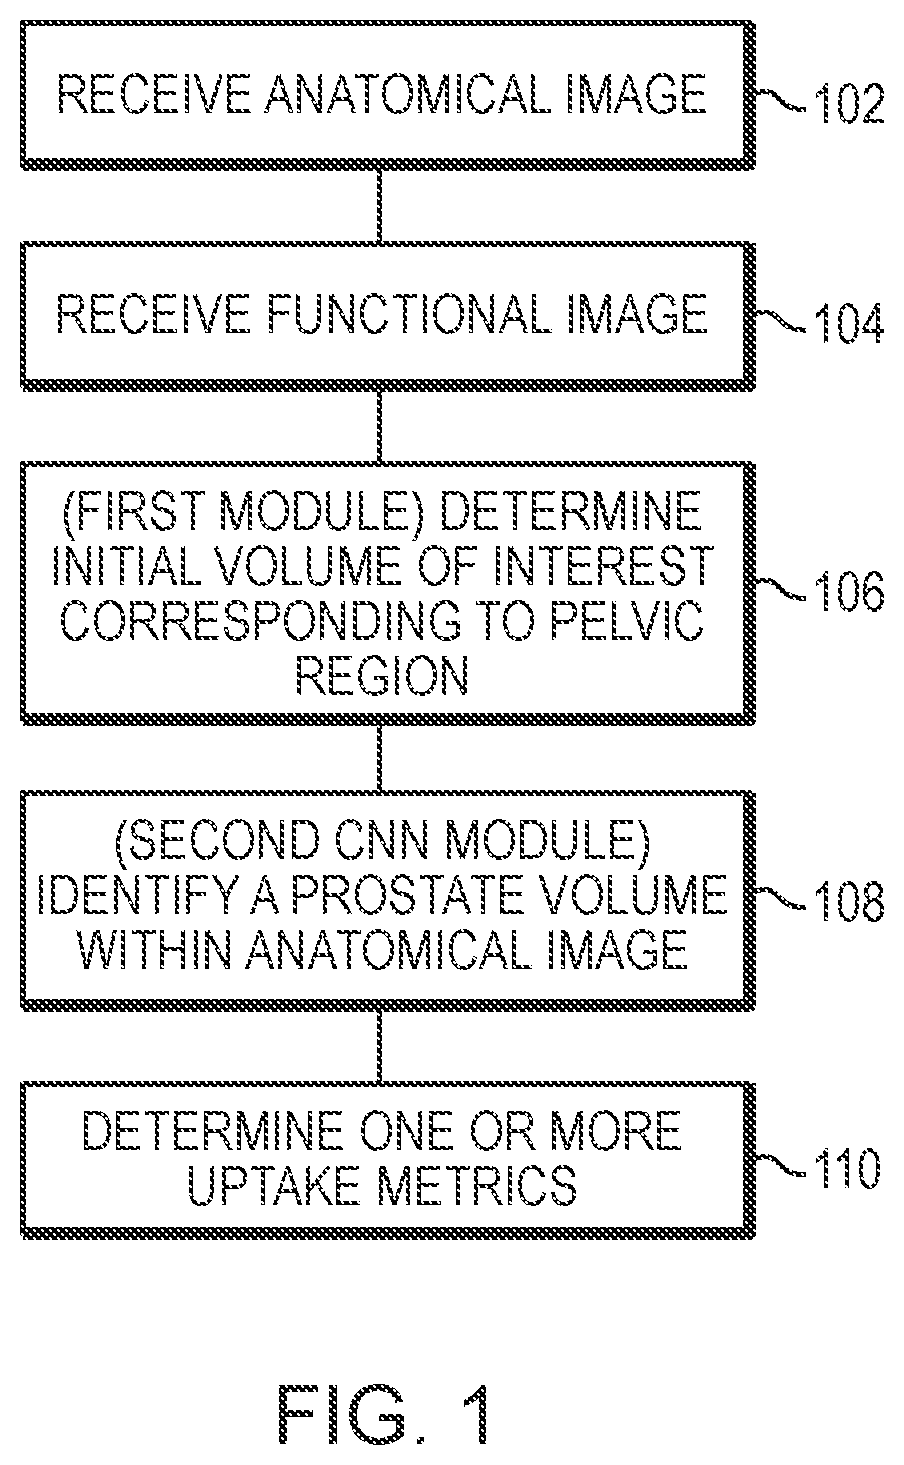 Systems and methods for rapid neural network-based image segmentation and radiopharmaceutical uptake determination